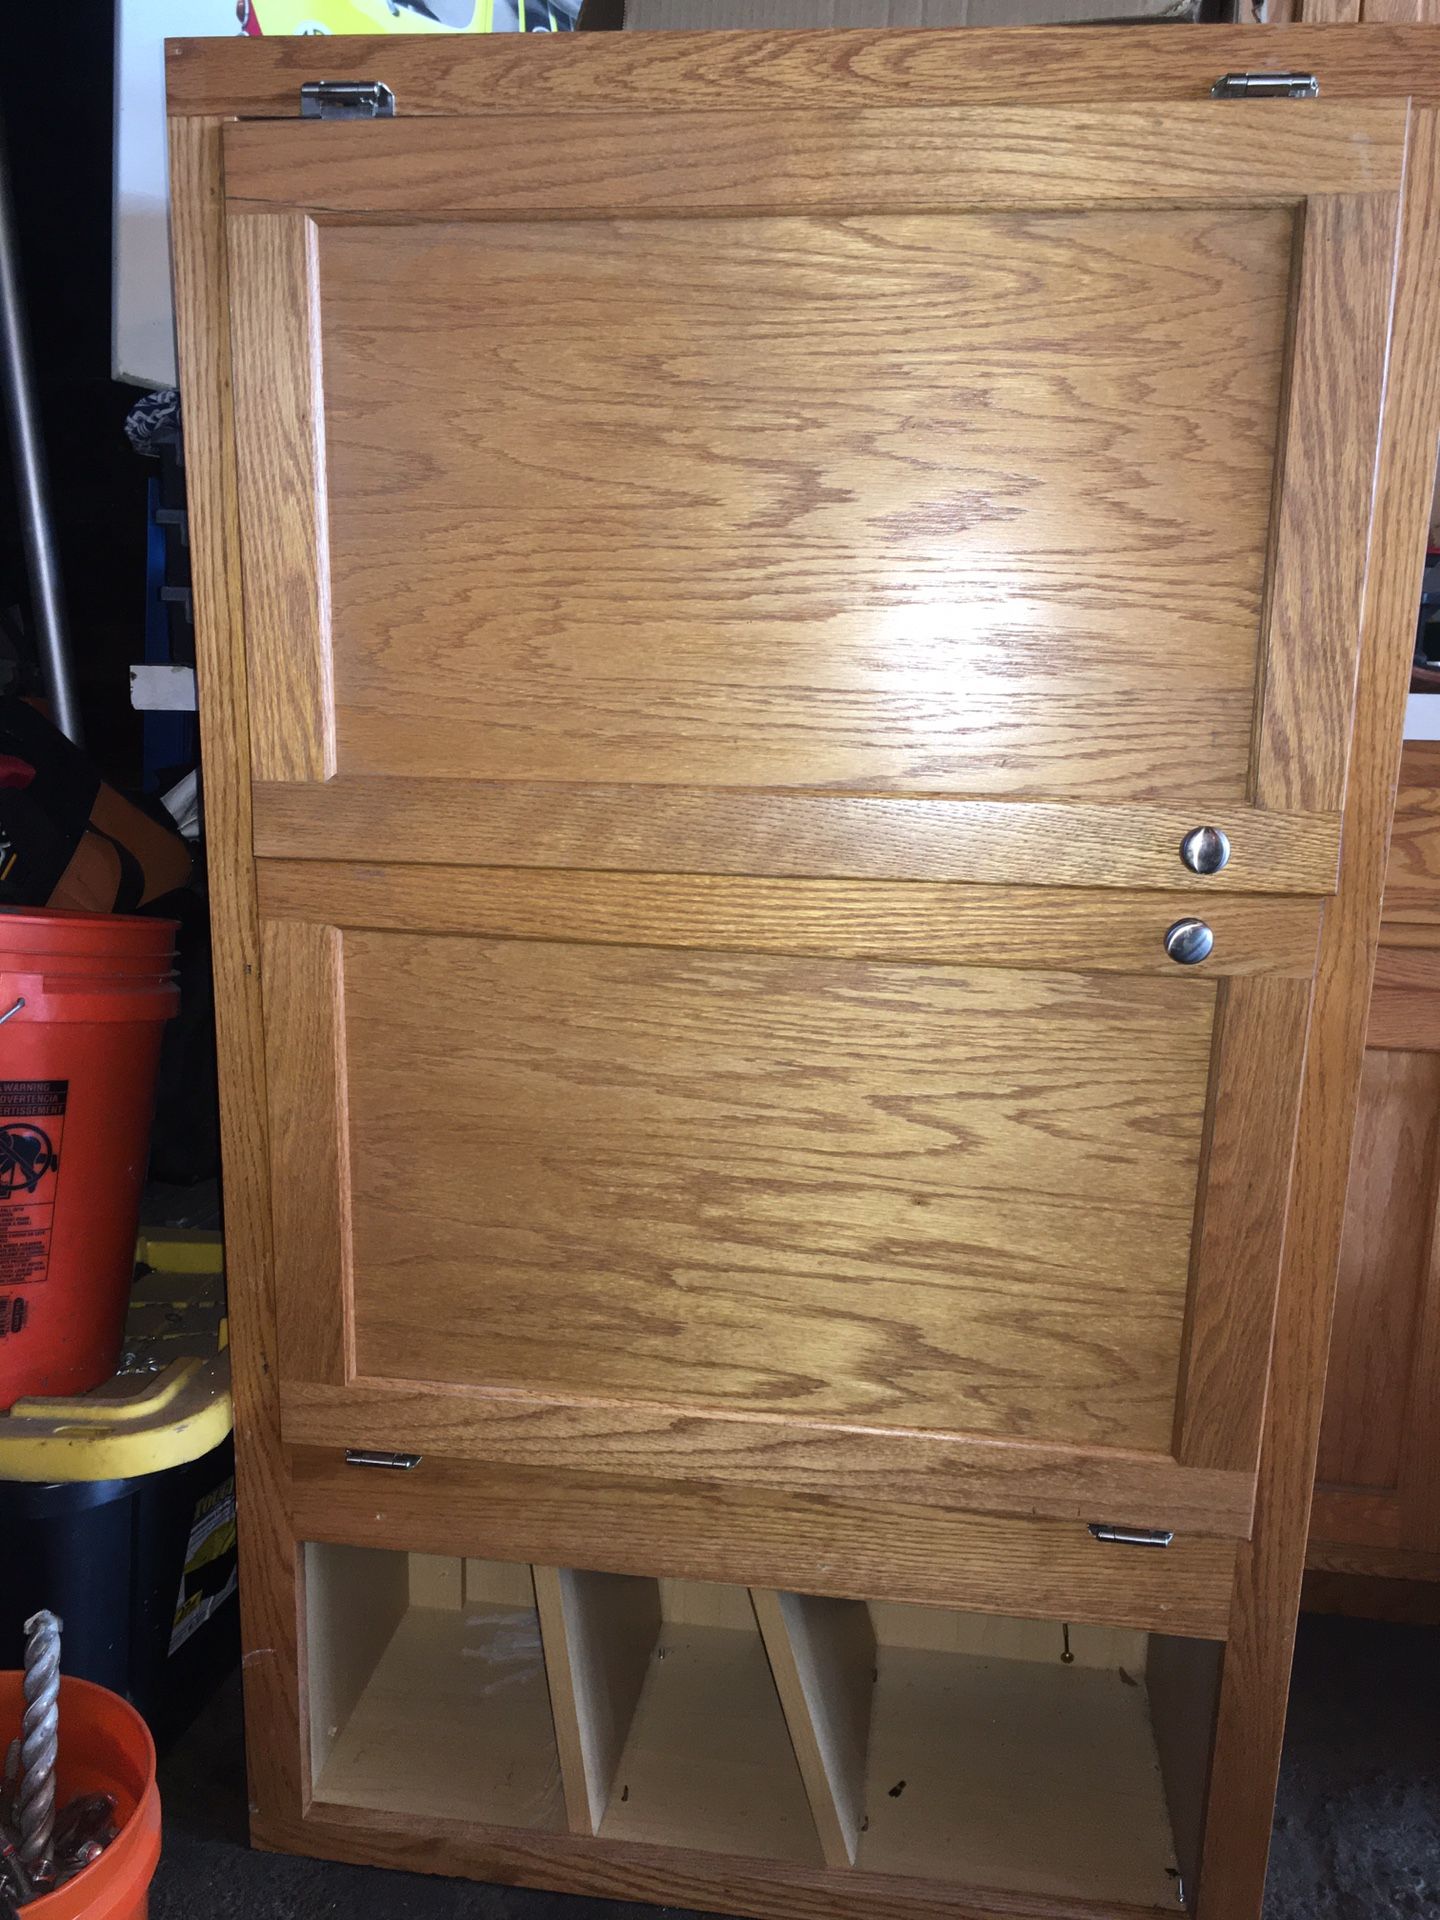 L-shaped kitchen cabinet with countertop and sink